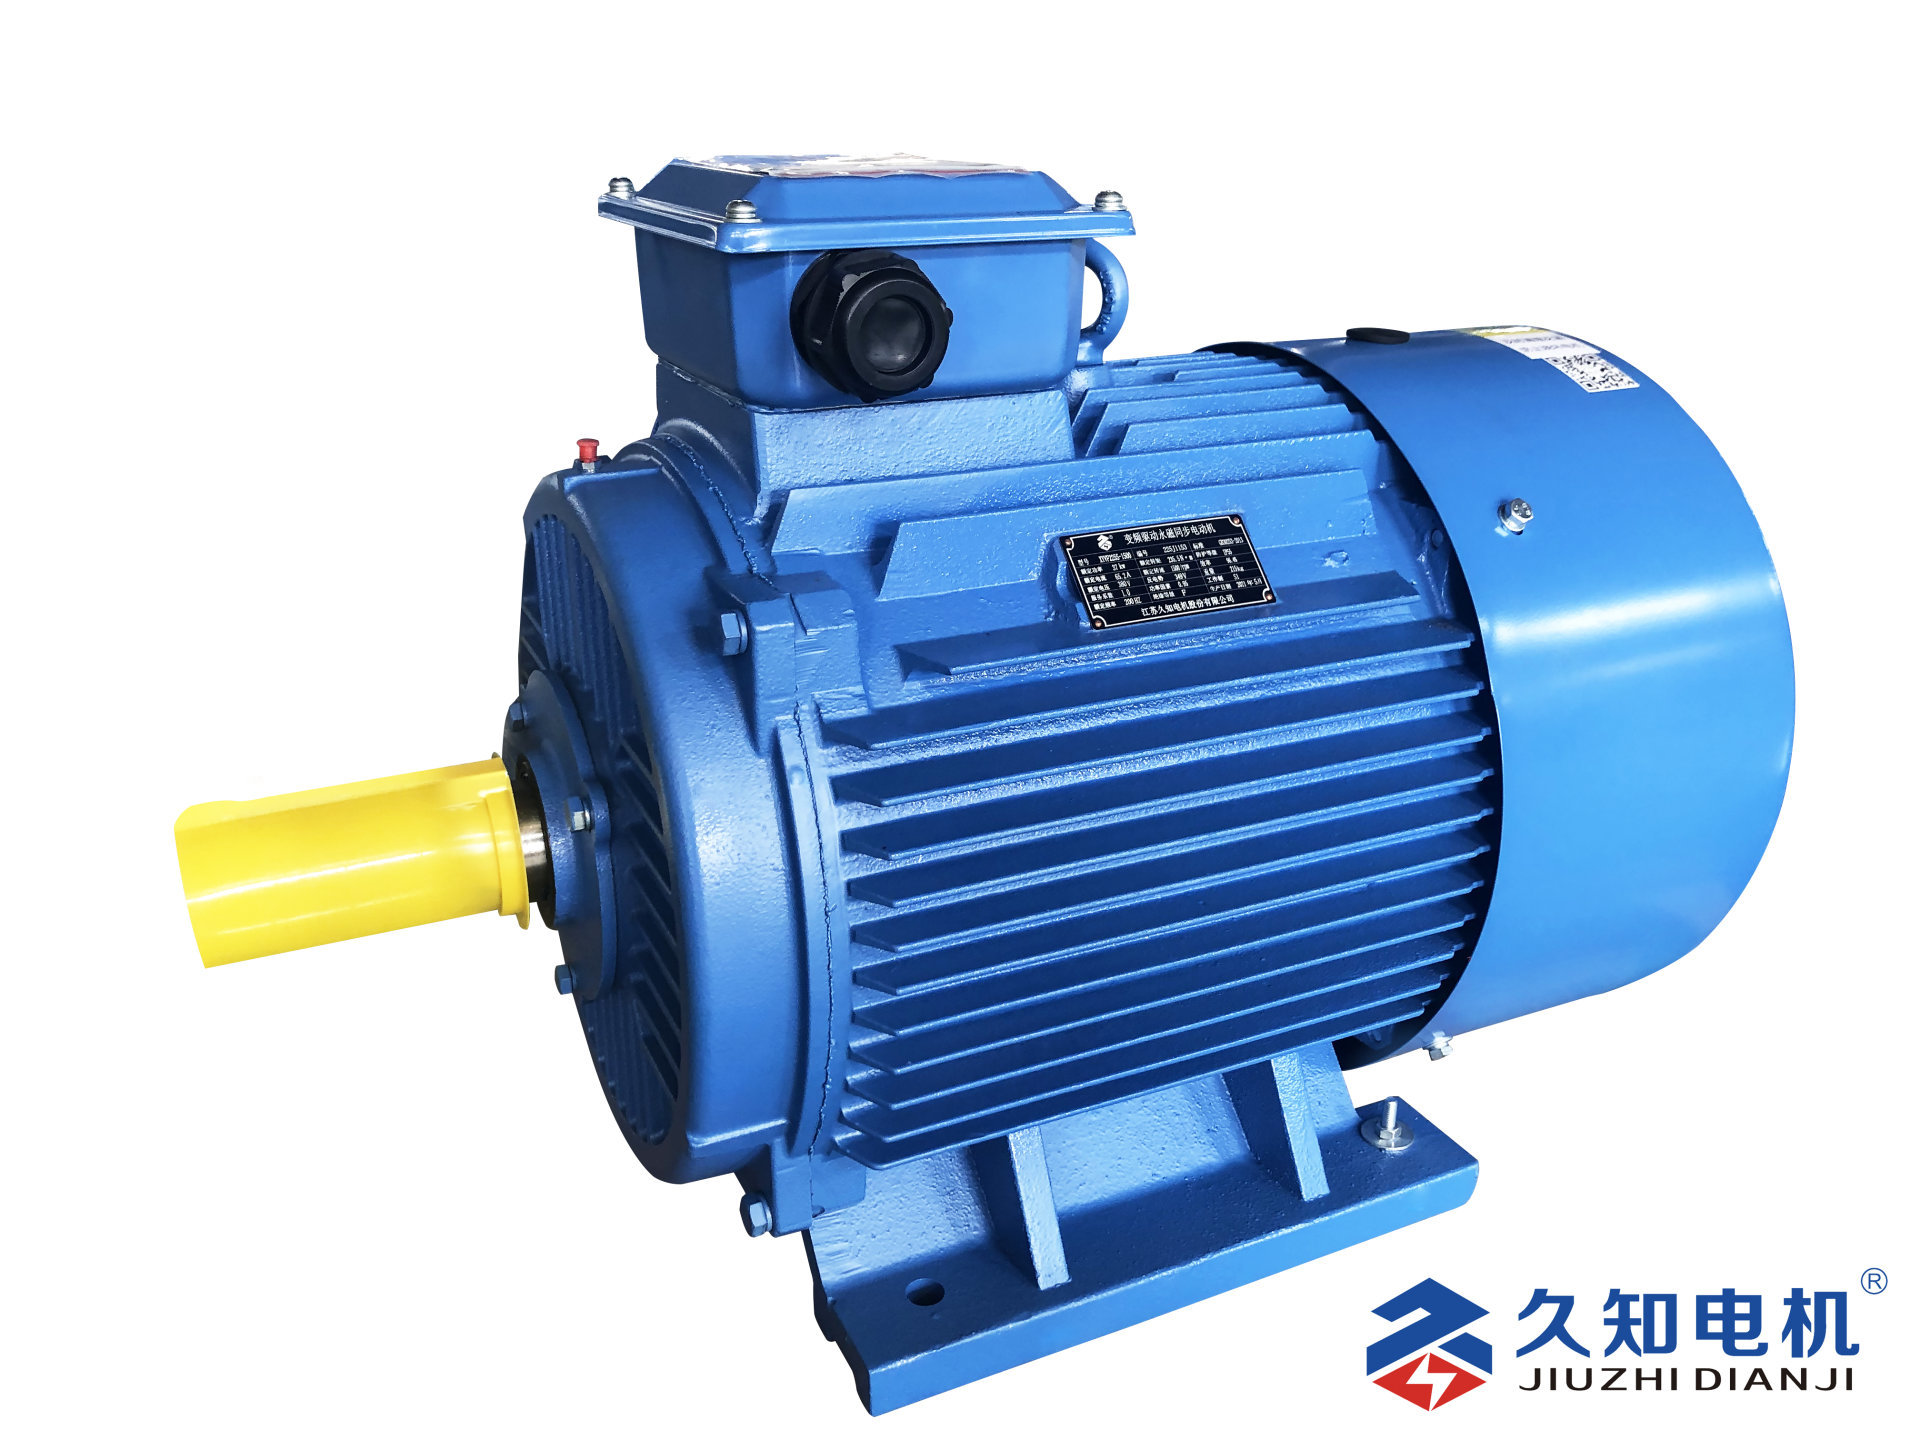 XY series self-starting permanent magnet synchronous motor